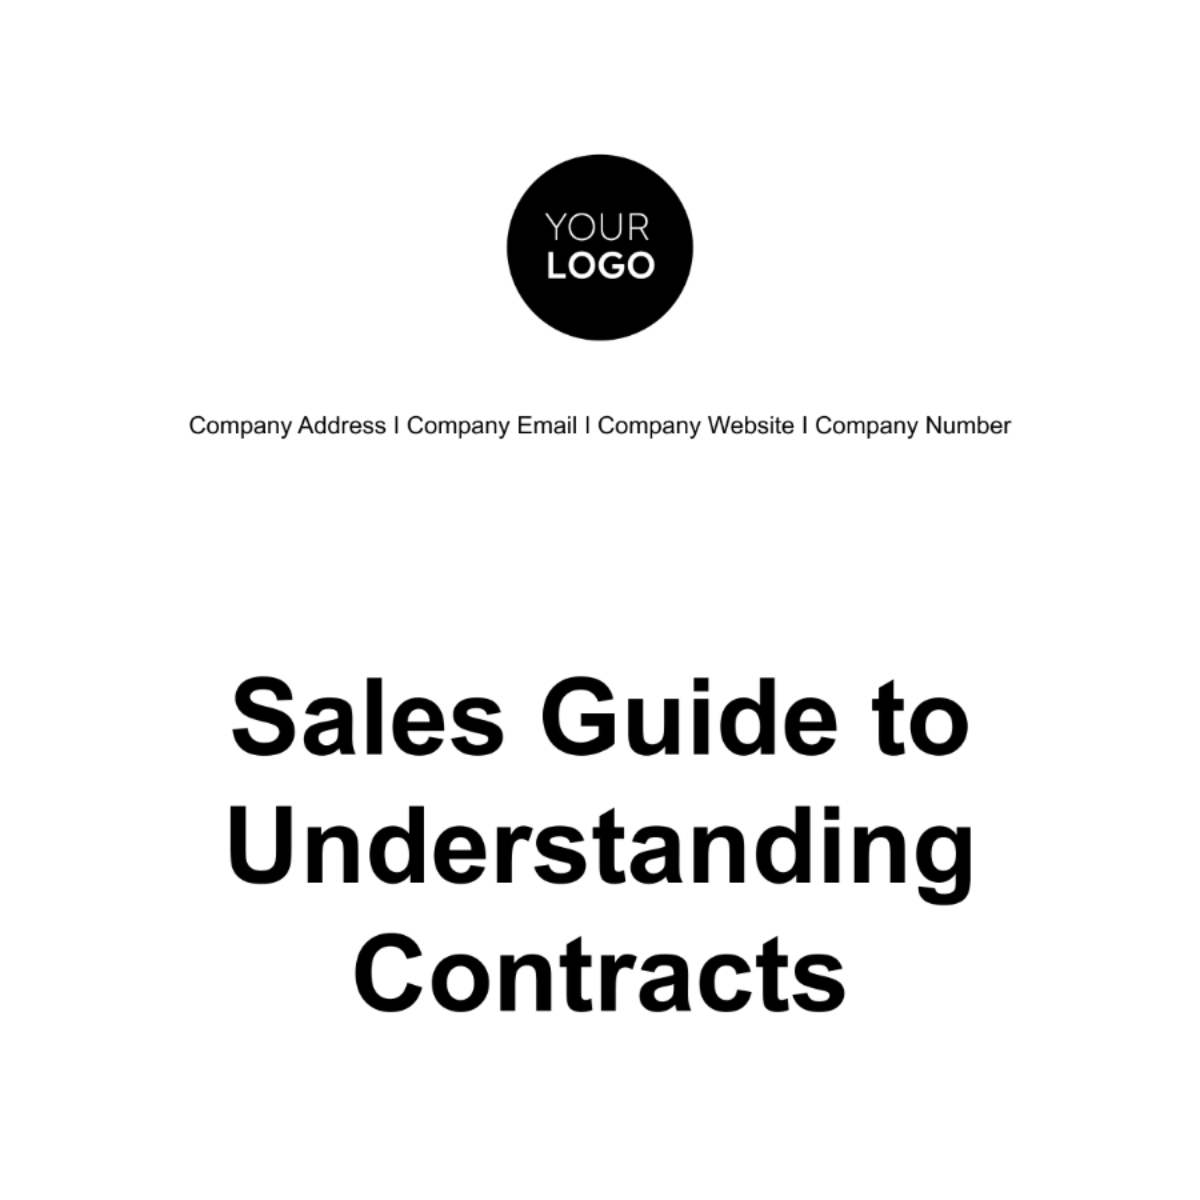 Sales Guide to Understanding Contracts Template